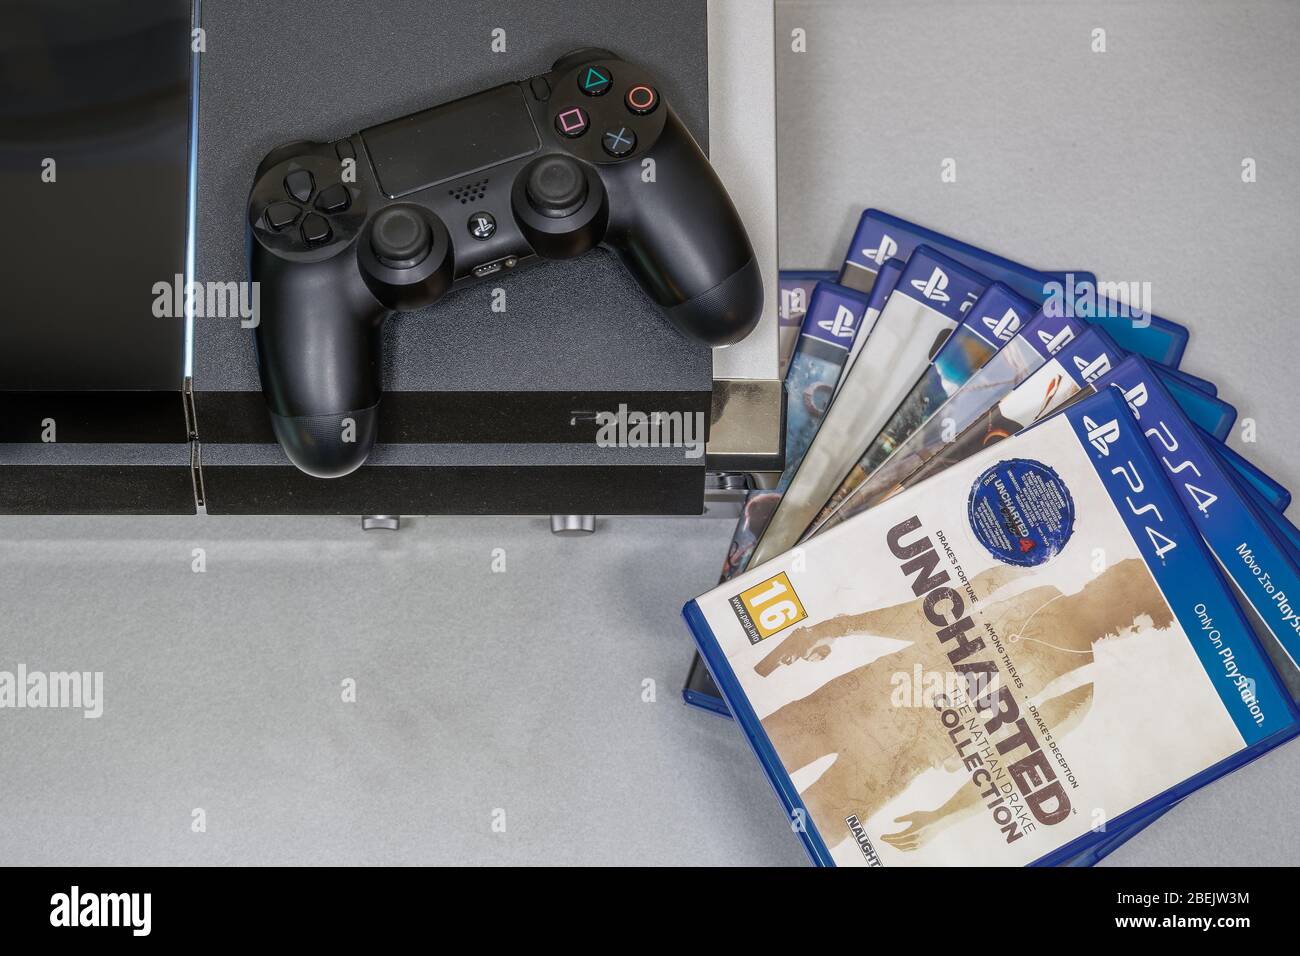 Ps4 Games High Resolution Stock Photography and Images - Alamy